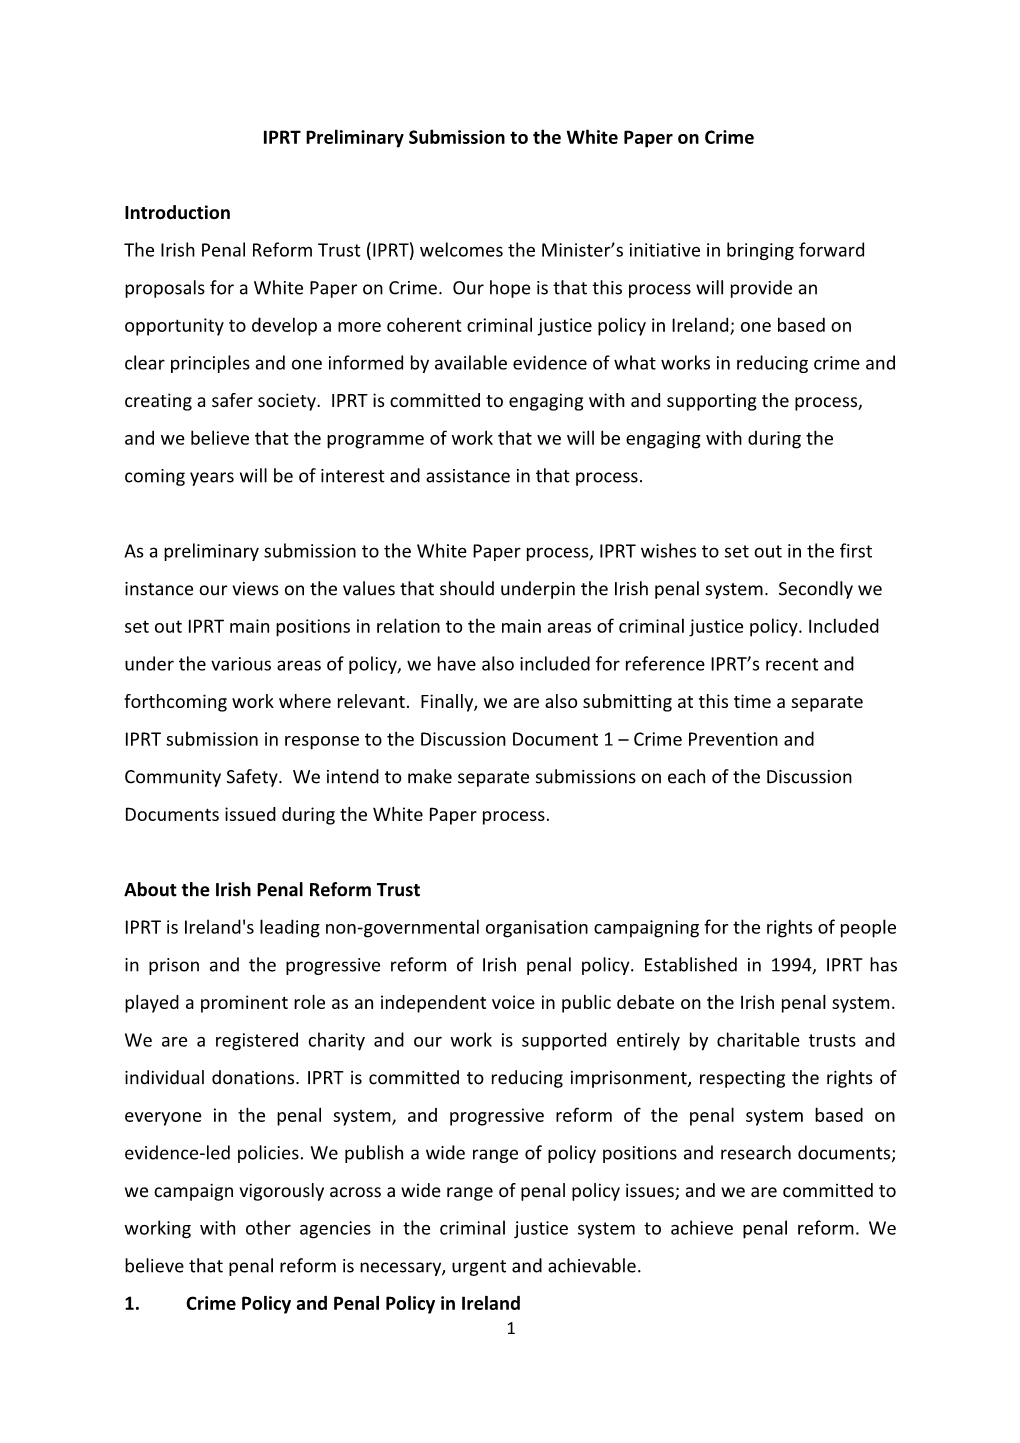 IPRT Preliminary Submission to the White Paper on Crime